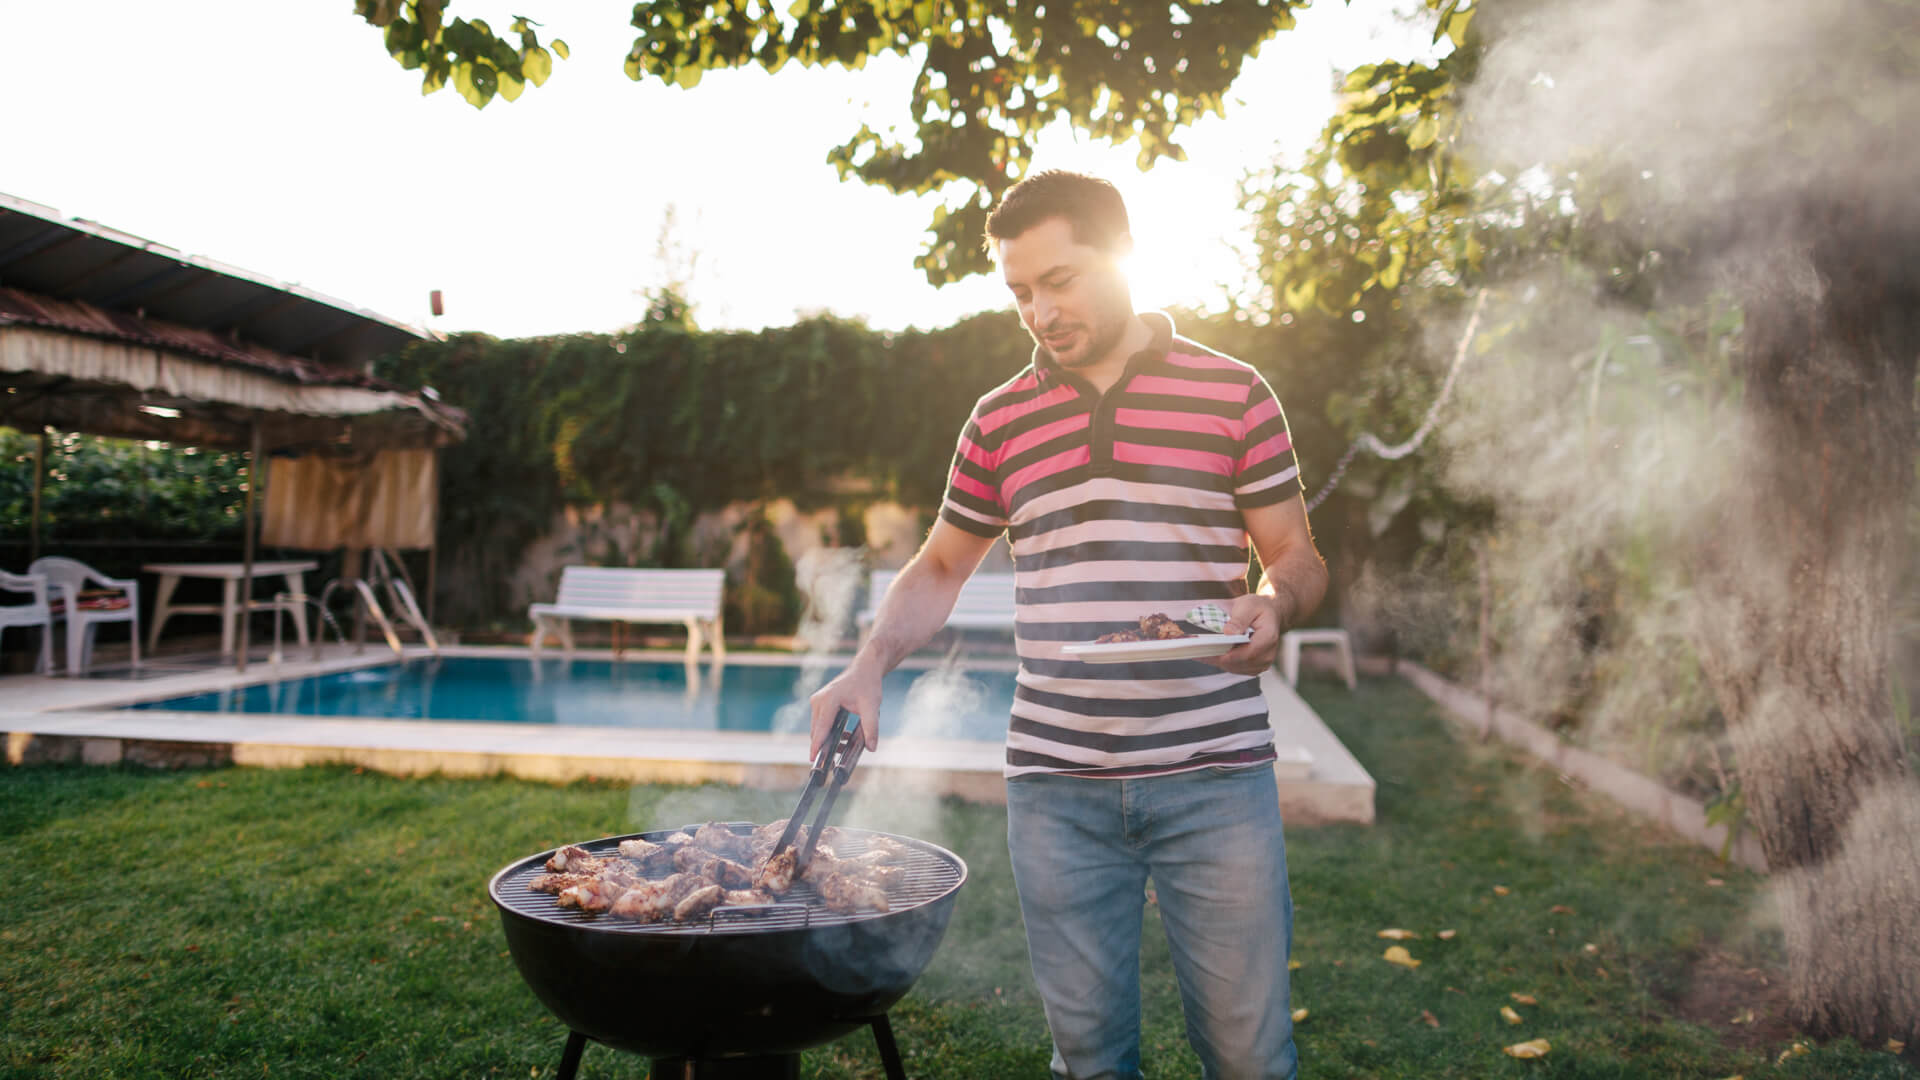 The Best Budget Cuts of Beef: How To BBQ on a Budget